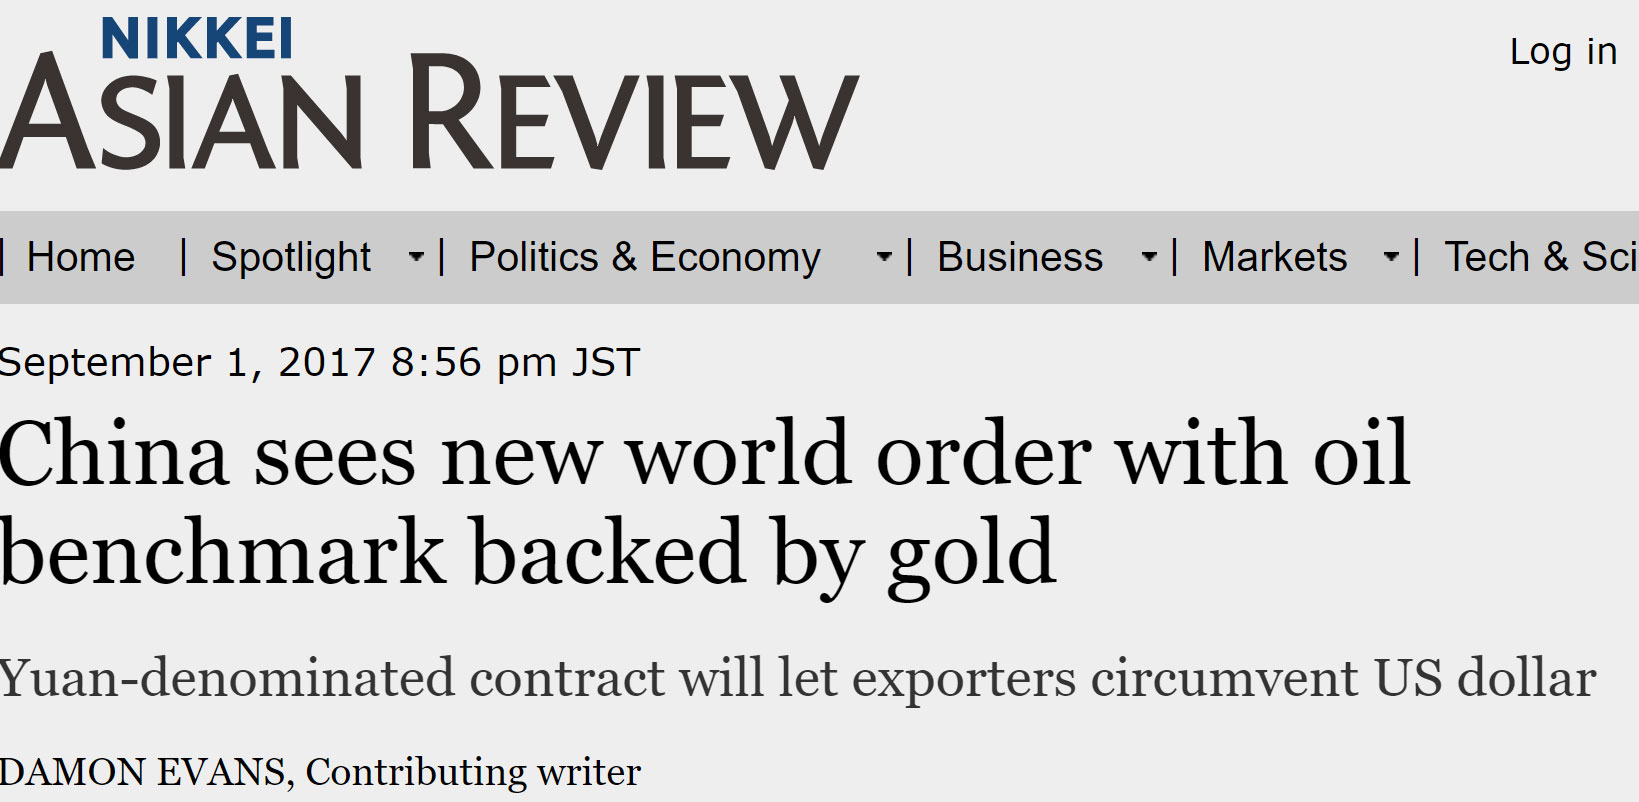 6-China-sees-new-world-order-with-oil-benchmark-backed-by-gold.jpg